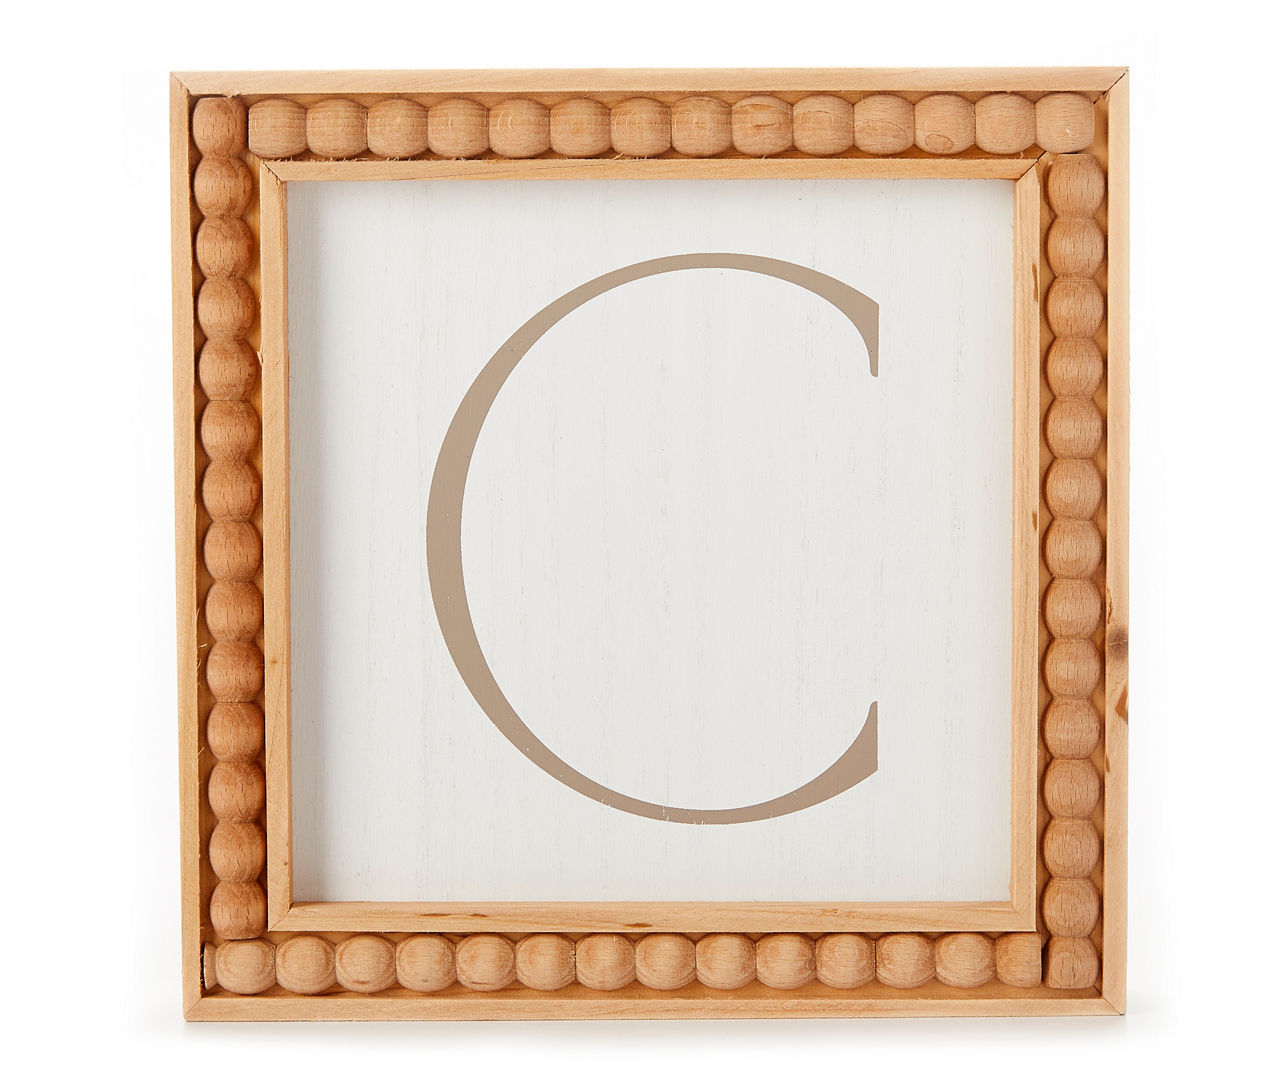 "C" Brown & White Wood Bead Framed Wall Plaque 